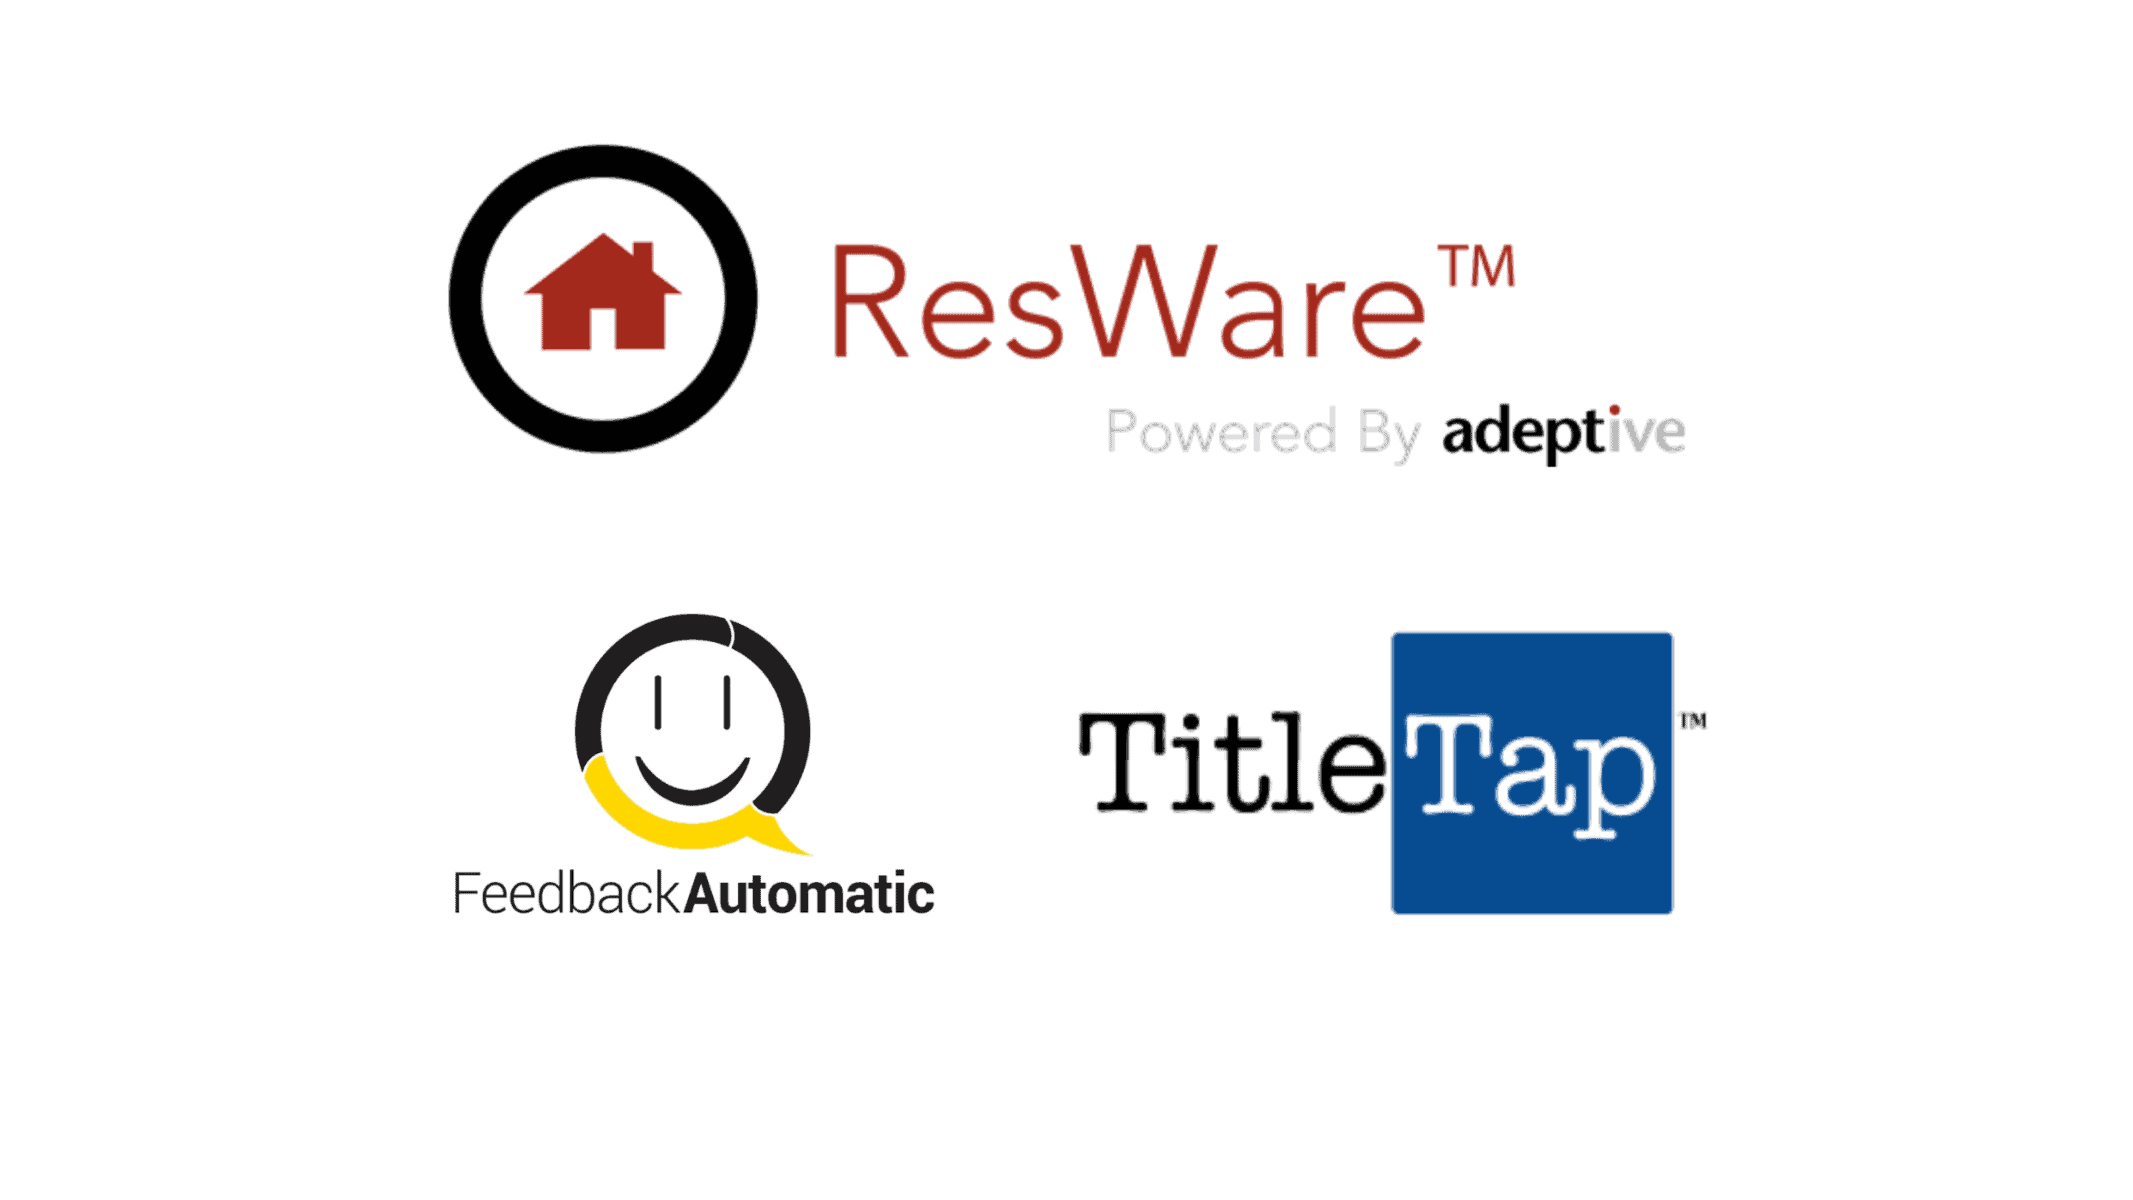 Adeptive Offers TitleTap’s Feedback Automatic Platform in ResWare